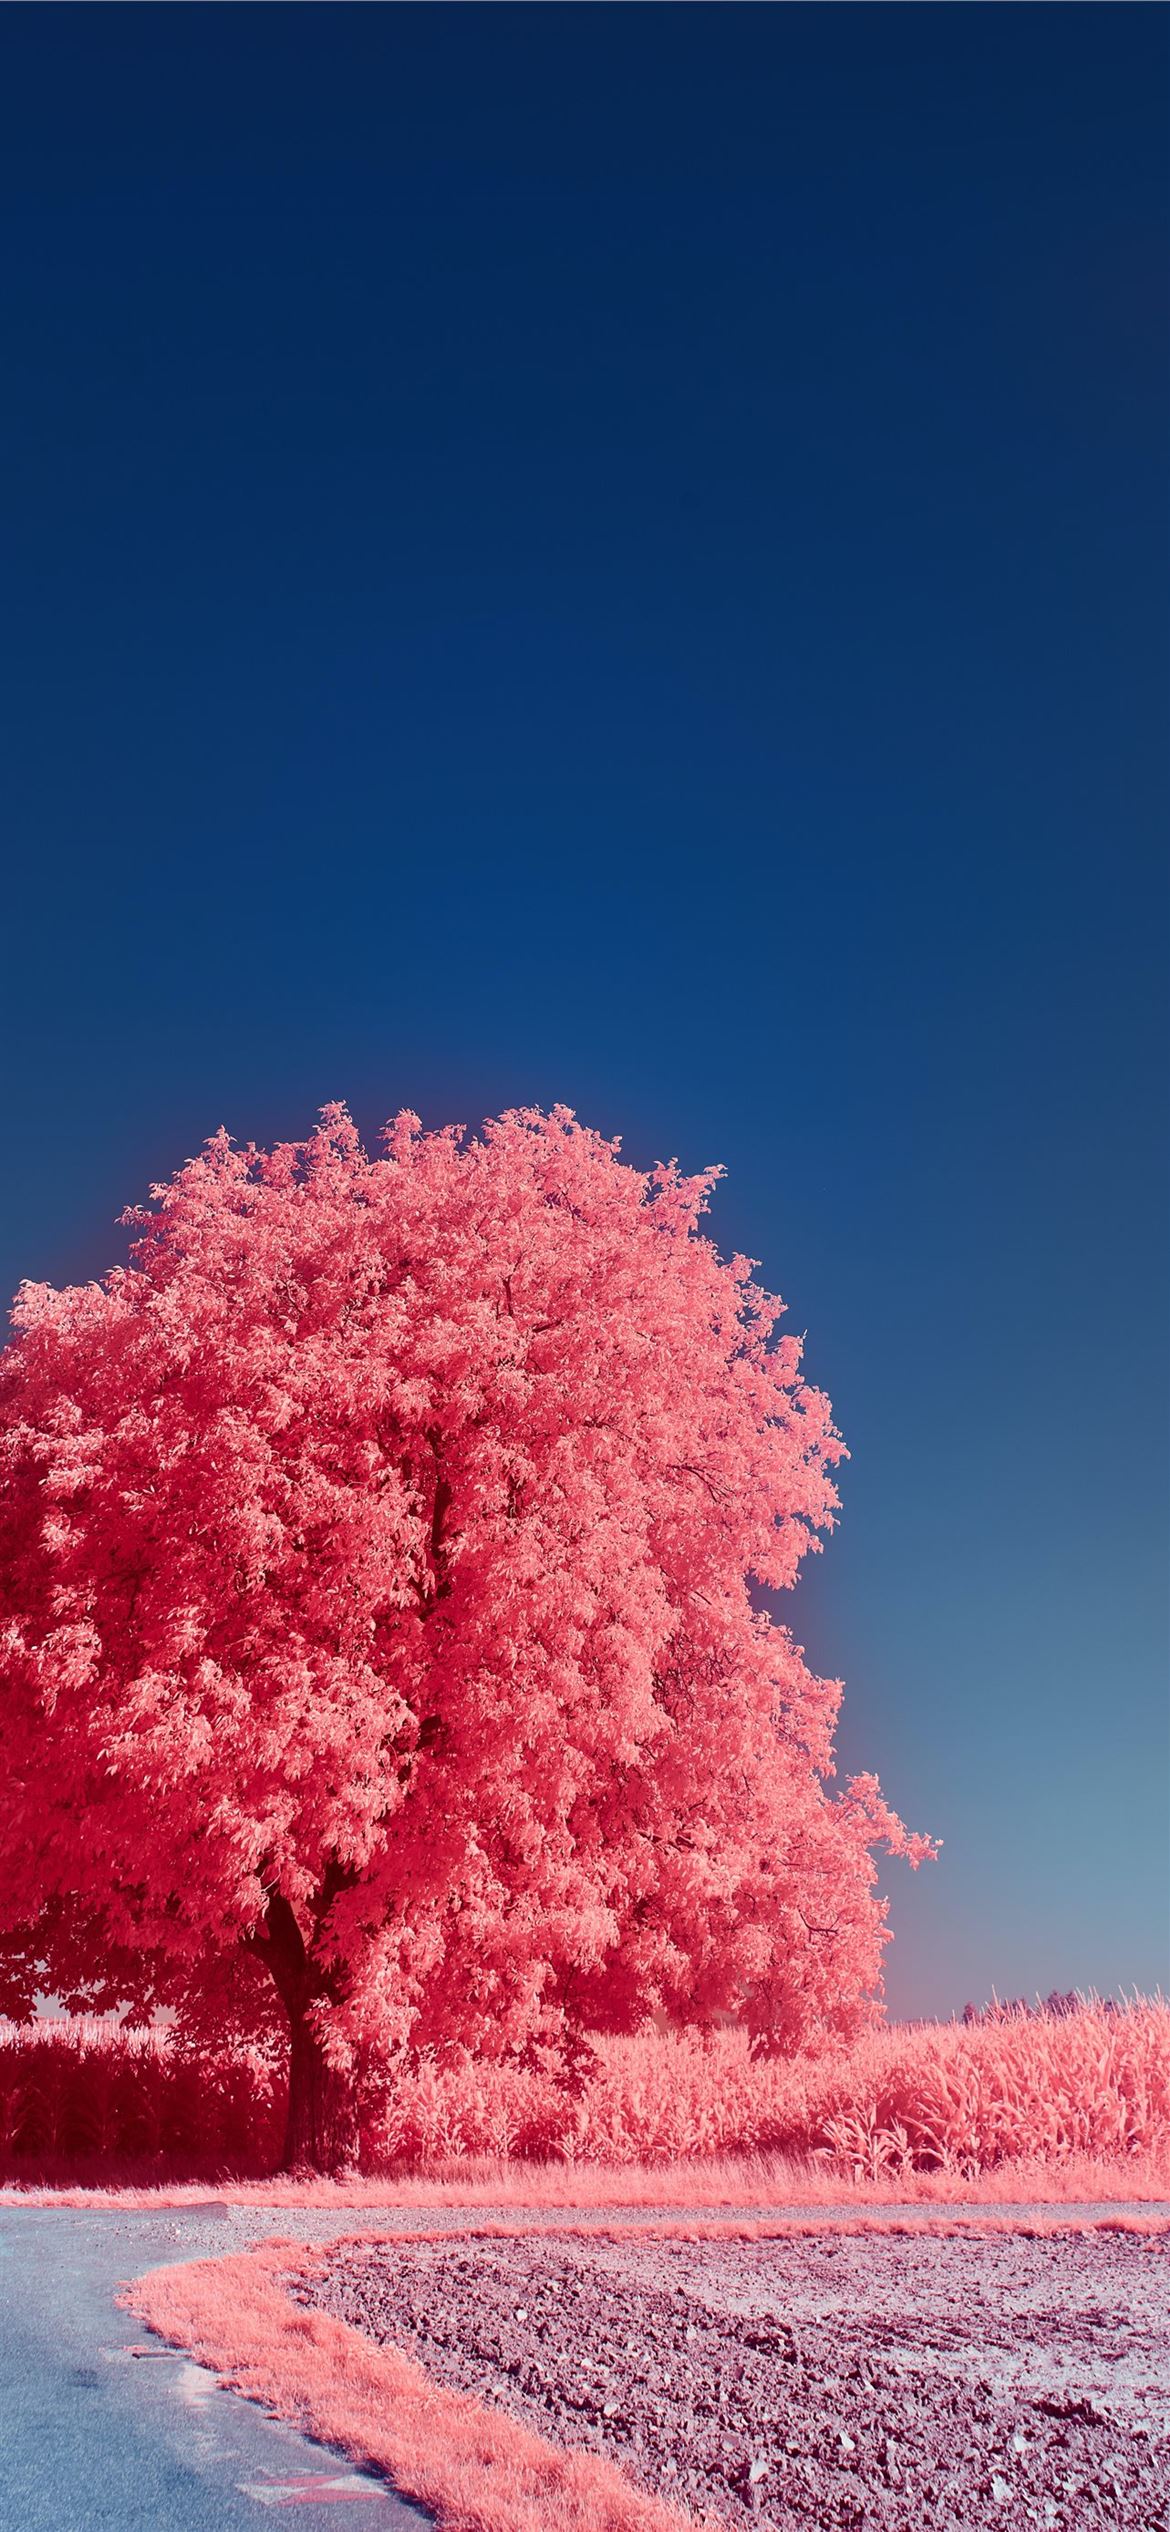 Pink And White Trees Under Blue Sky During Daytime iPhone